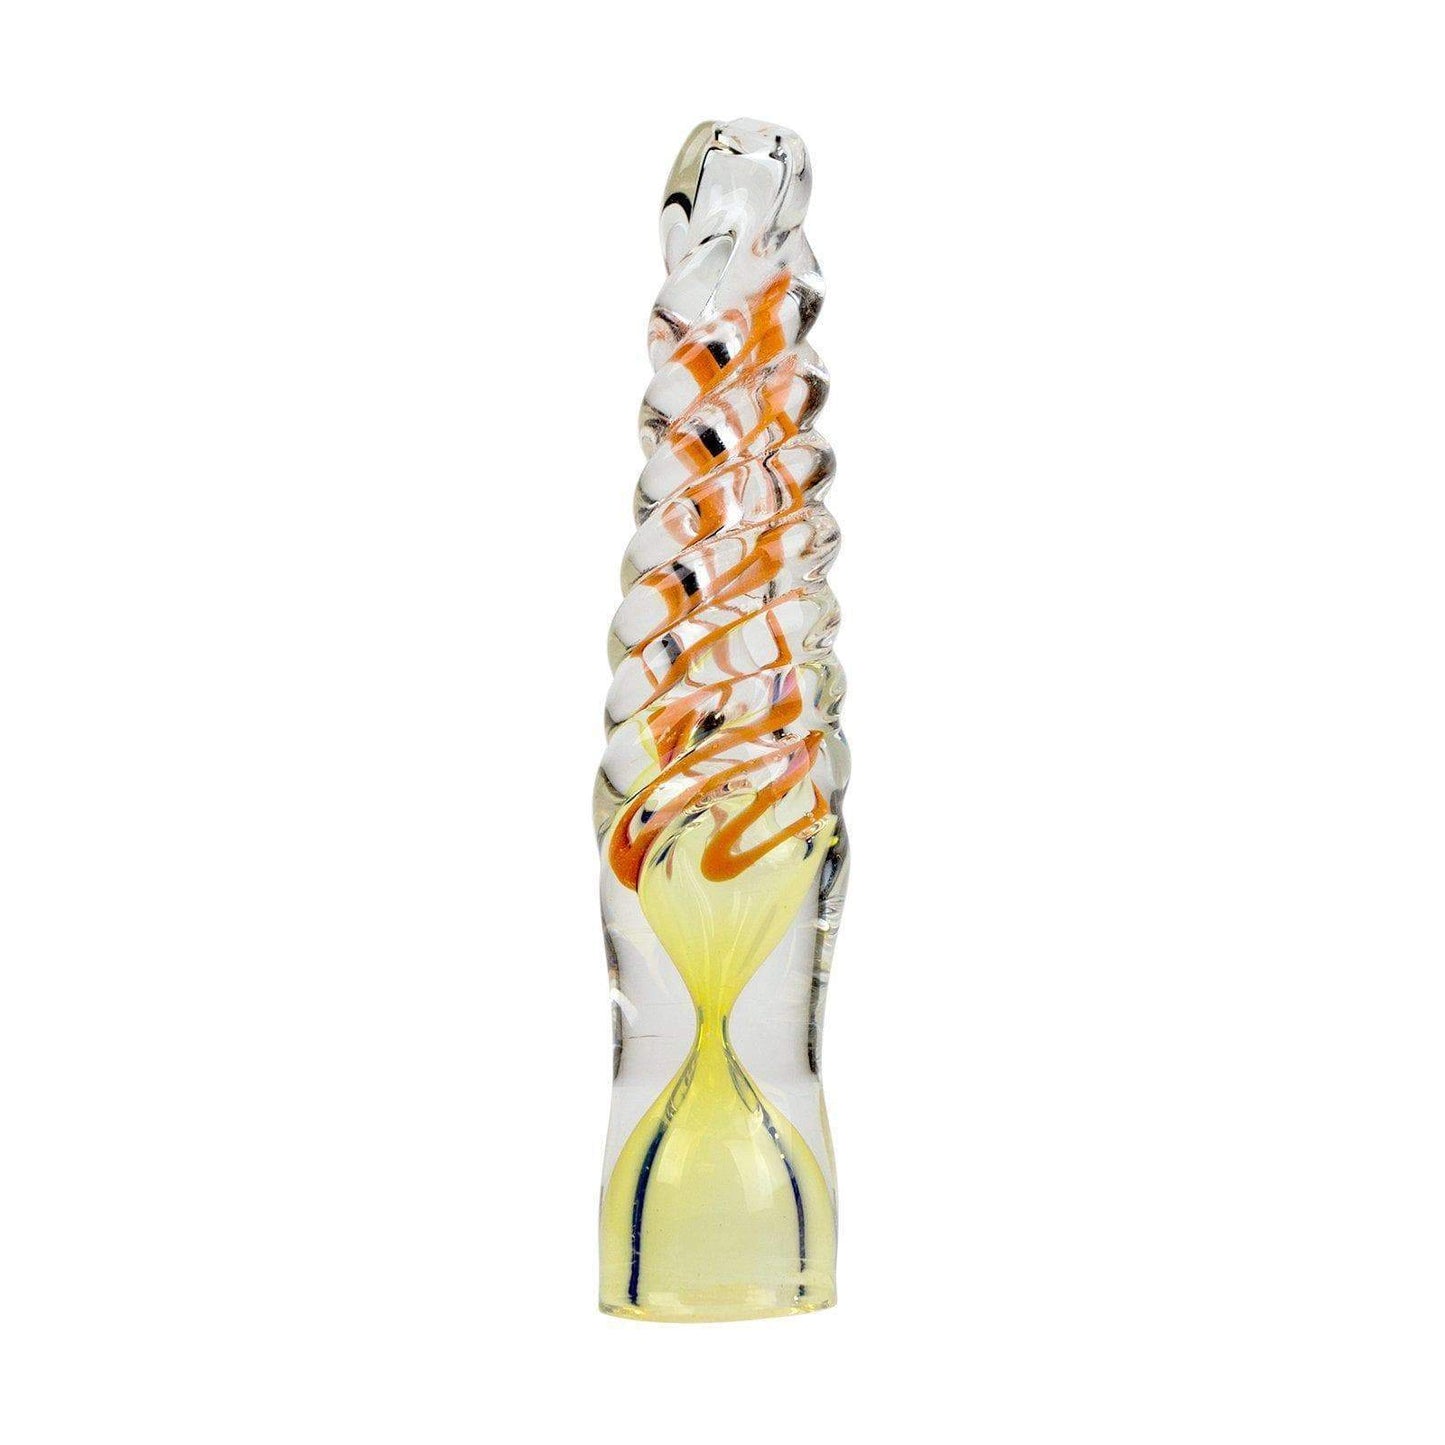 Twisted Glass Oney - 3in